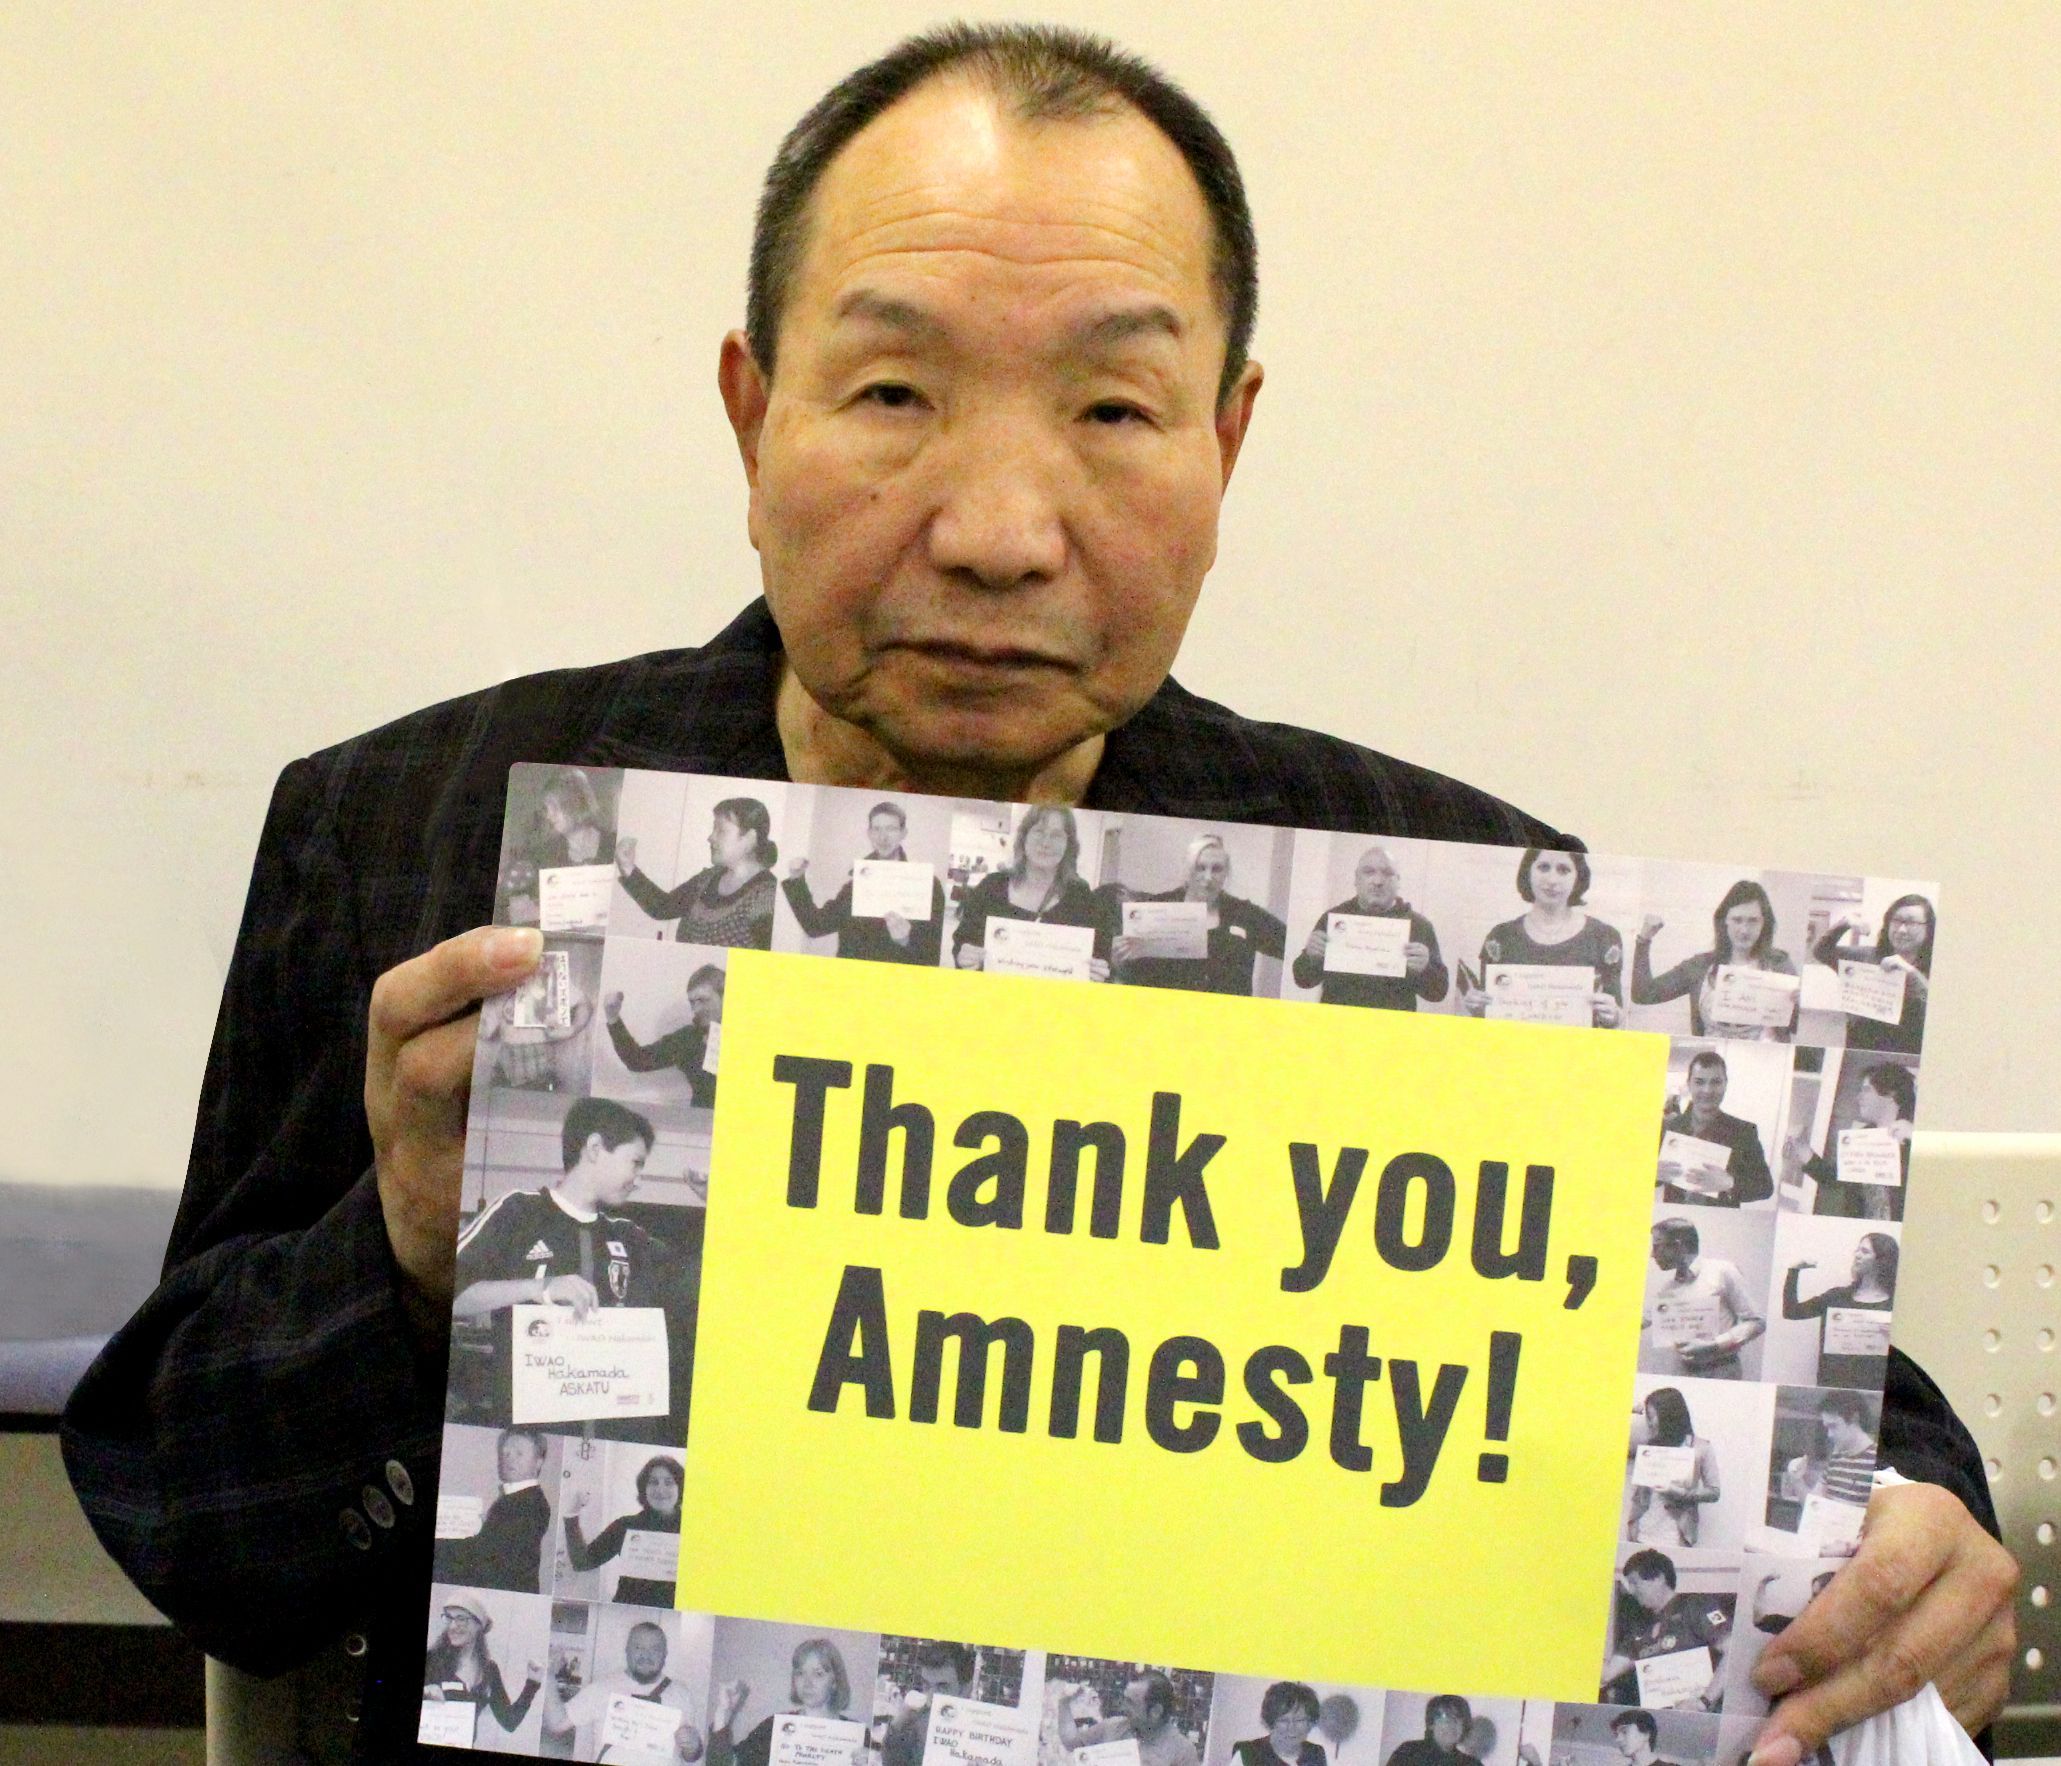 hakamada iwao looking at the camera holding a sign that says 'Thank you Amnesty!', the words are surrounded by photos of people taking action for him over the years. 